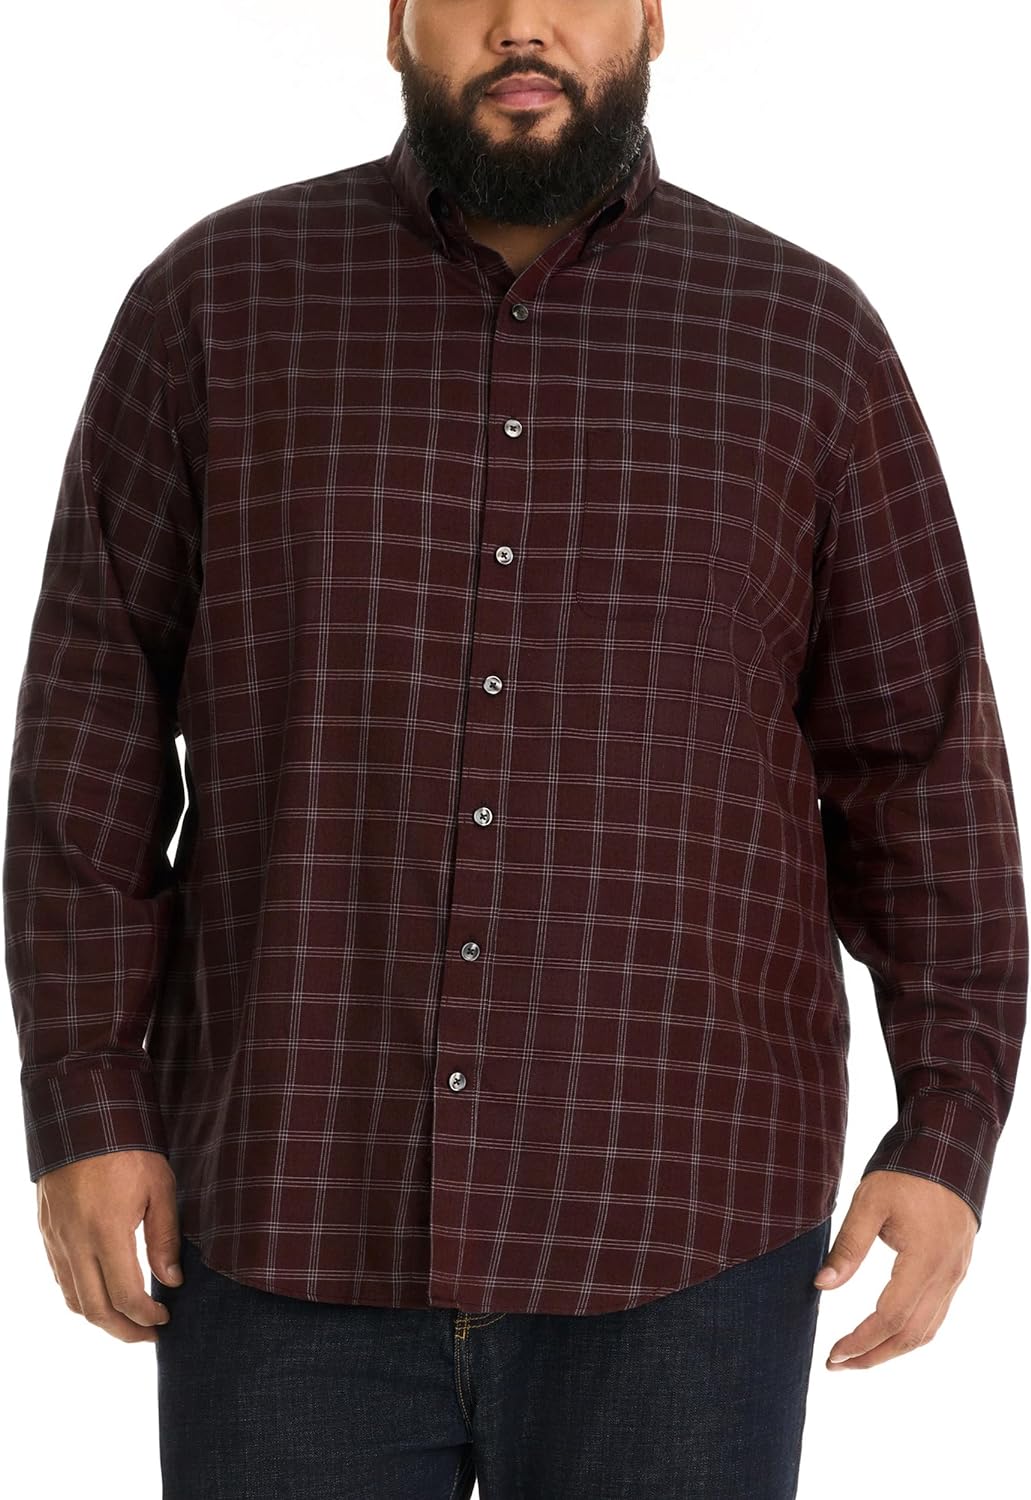 Van Heusen Men's Big and Tall Wrinkle Free Long Sleeve Button Down